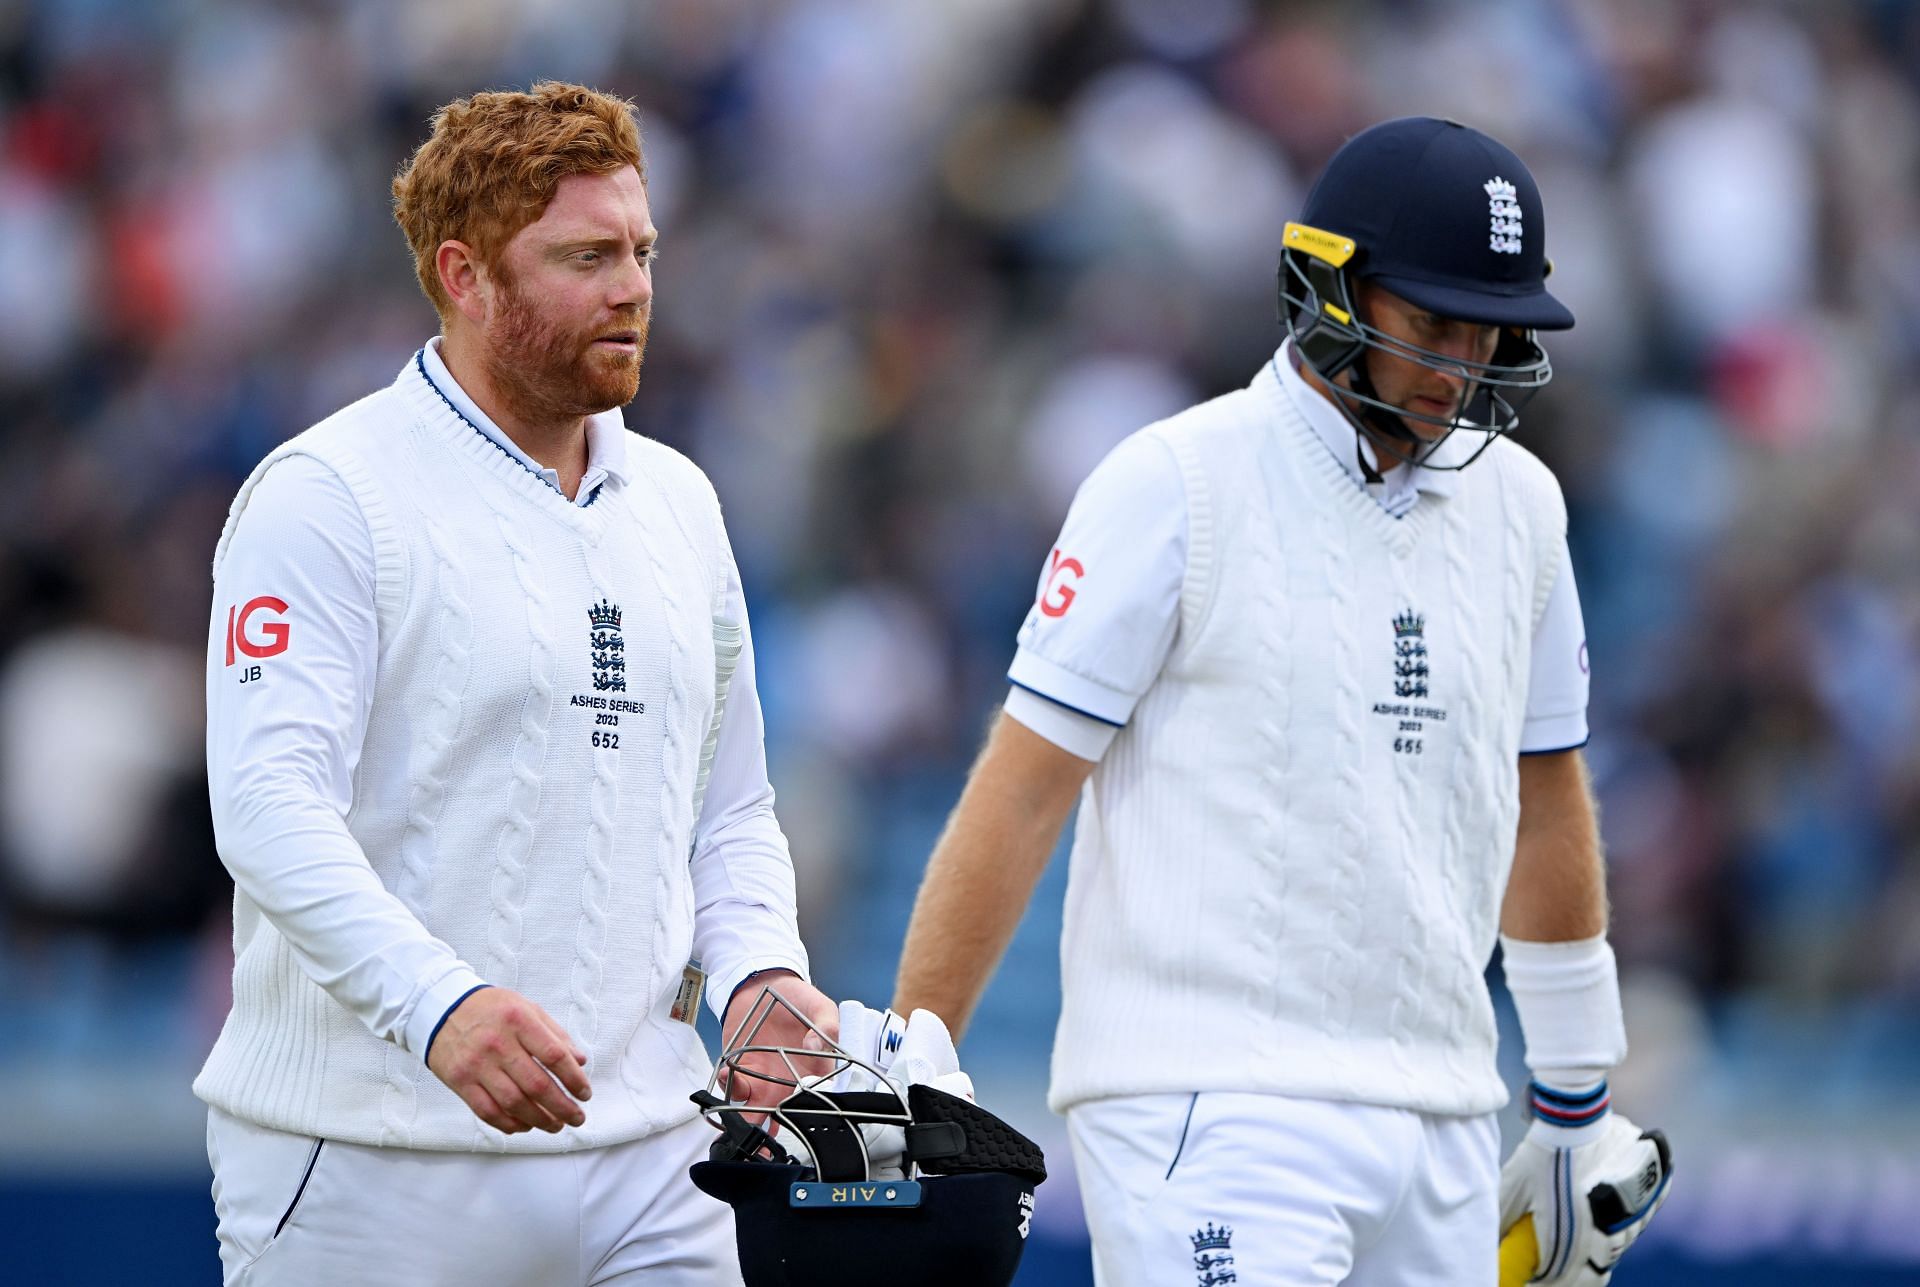 Jonny Bairstow and Joe Root will look to lead England&#039;s charge on Day 2. (Image Credits: Getty)